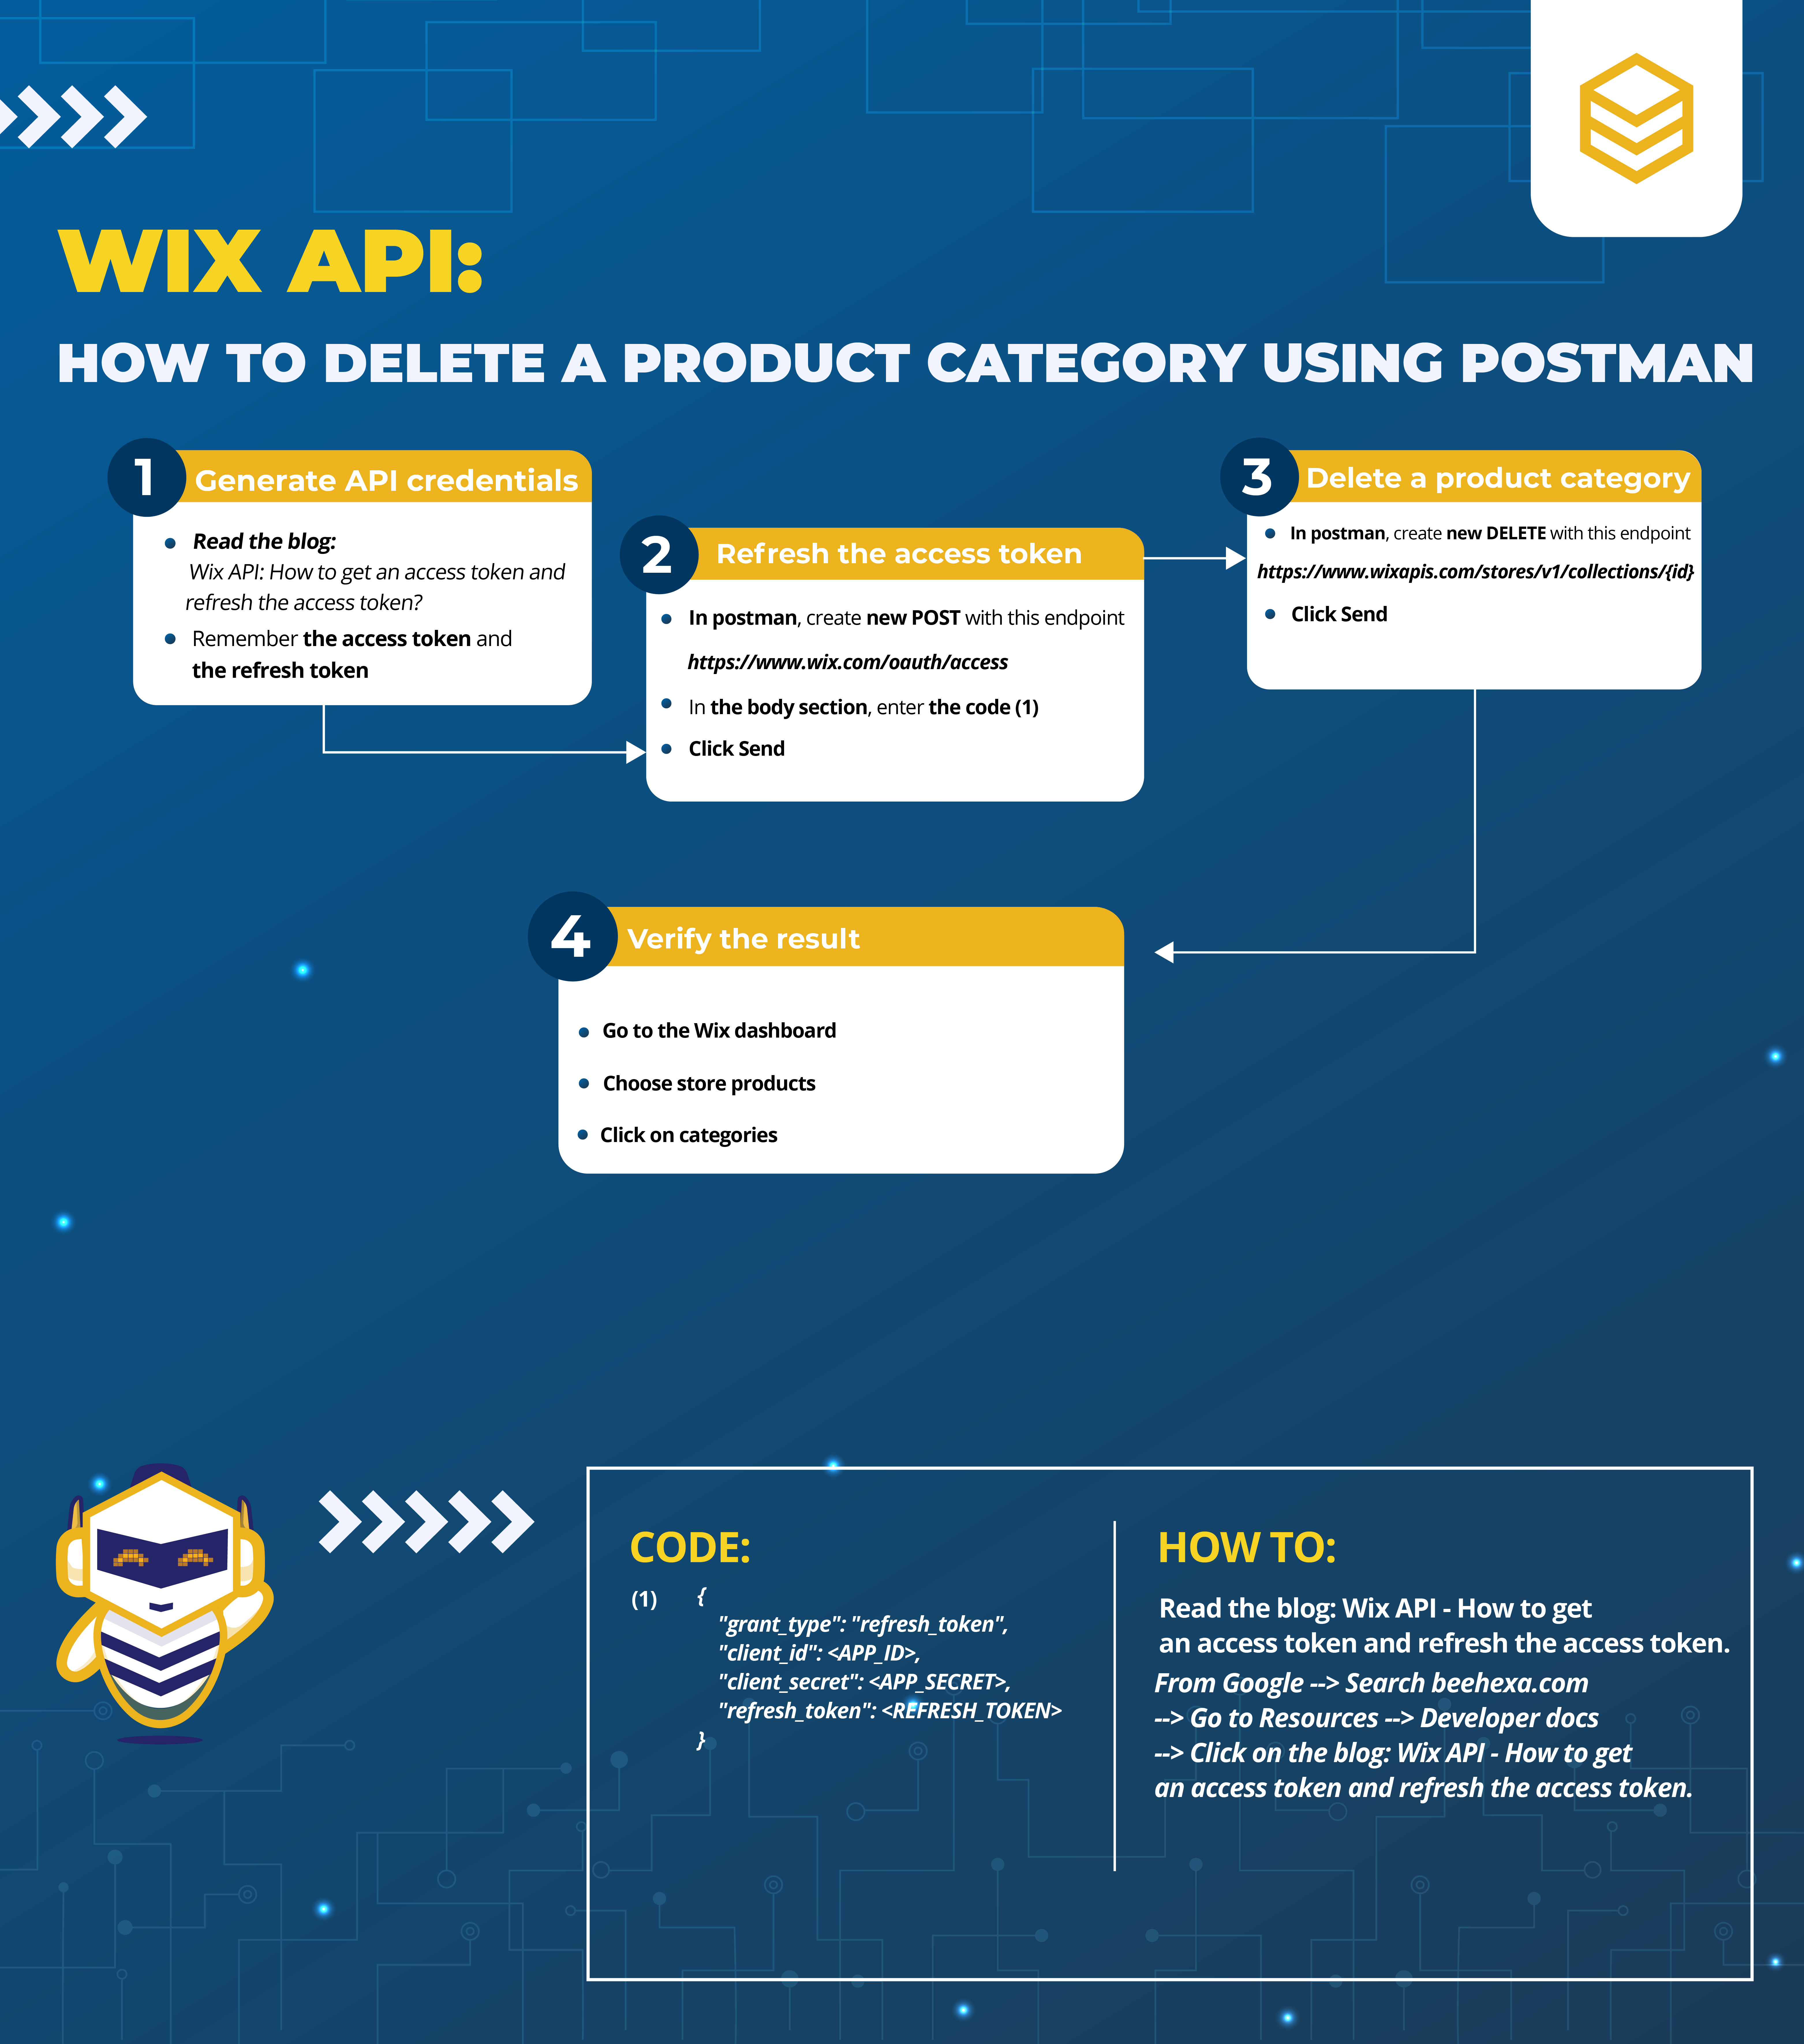 beehexa infor wix api how to delete a product category using postman 01